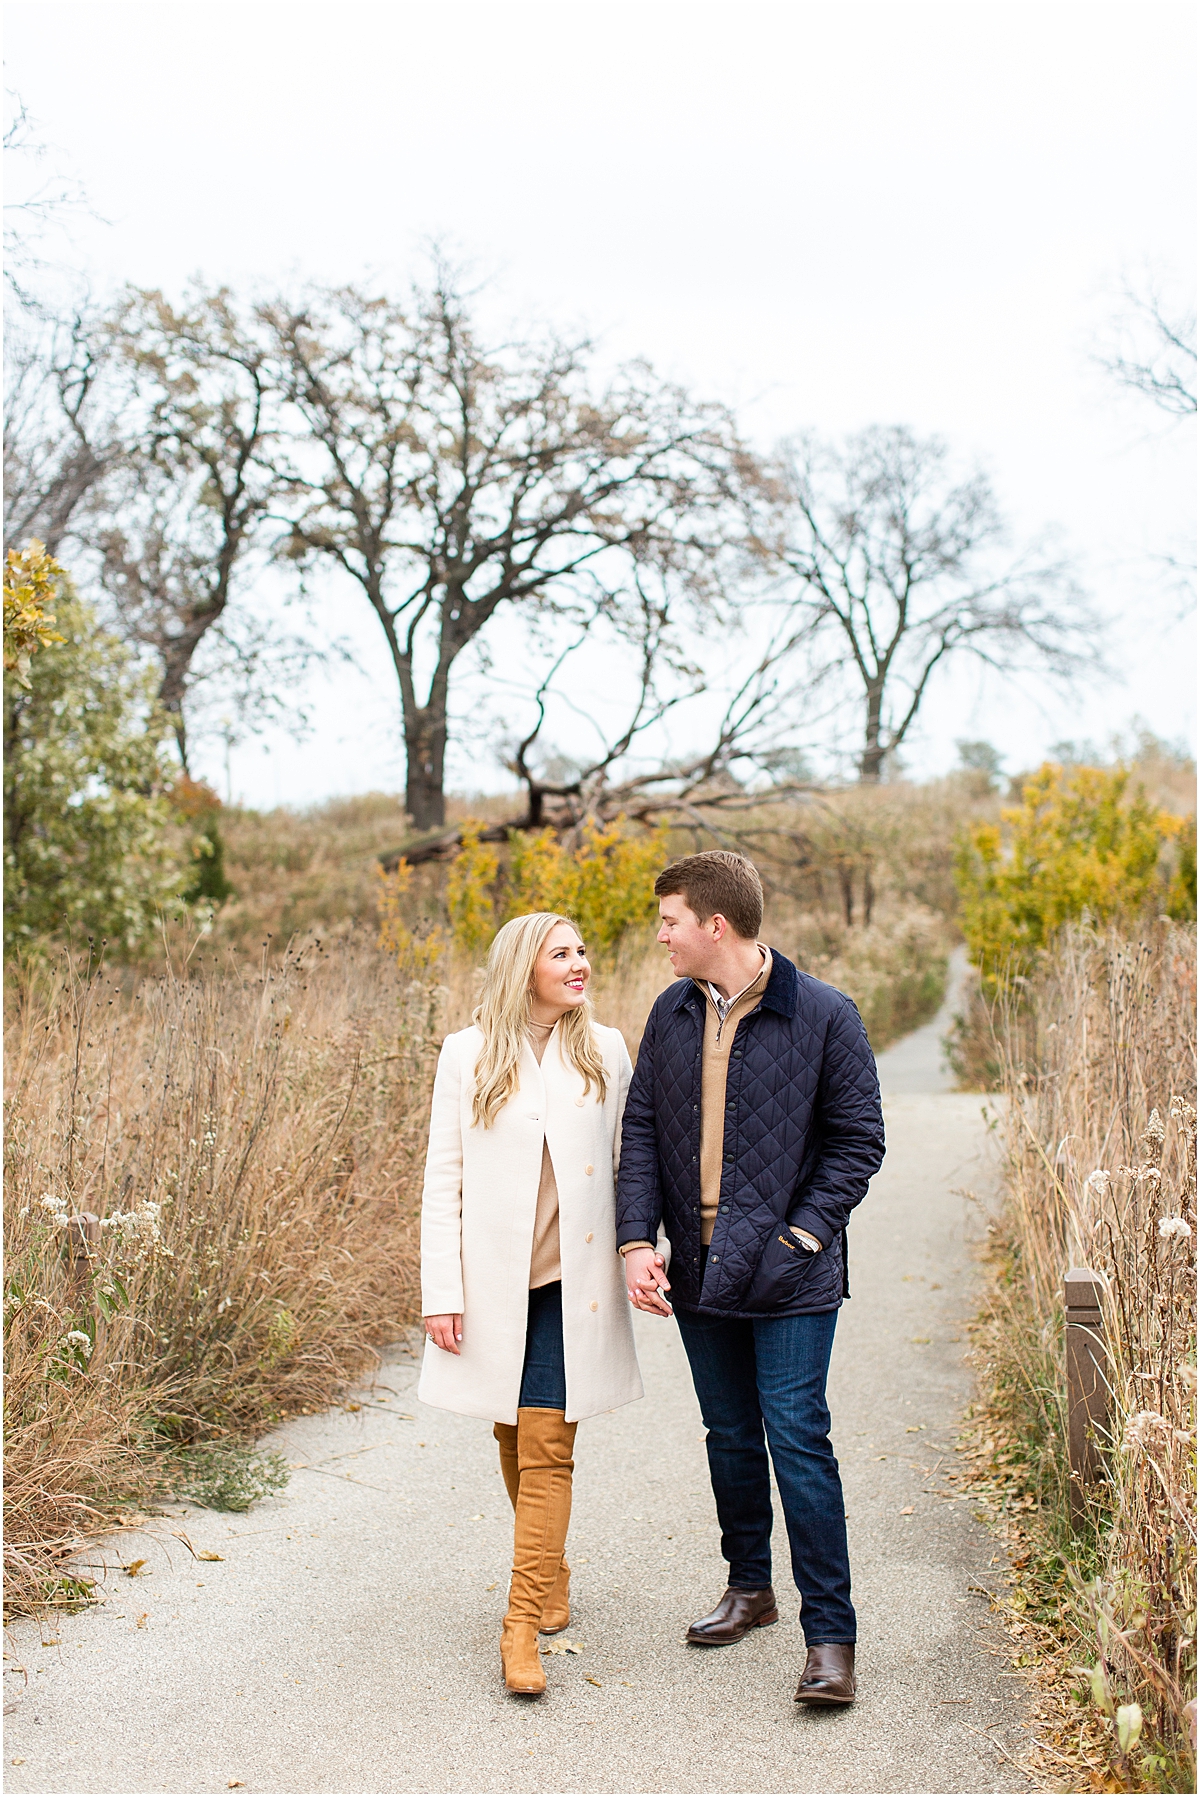 12 Best Chicago Engagement Session Locations